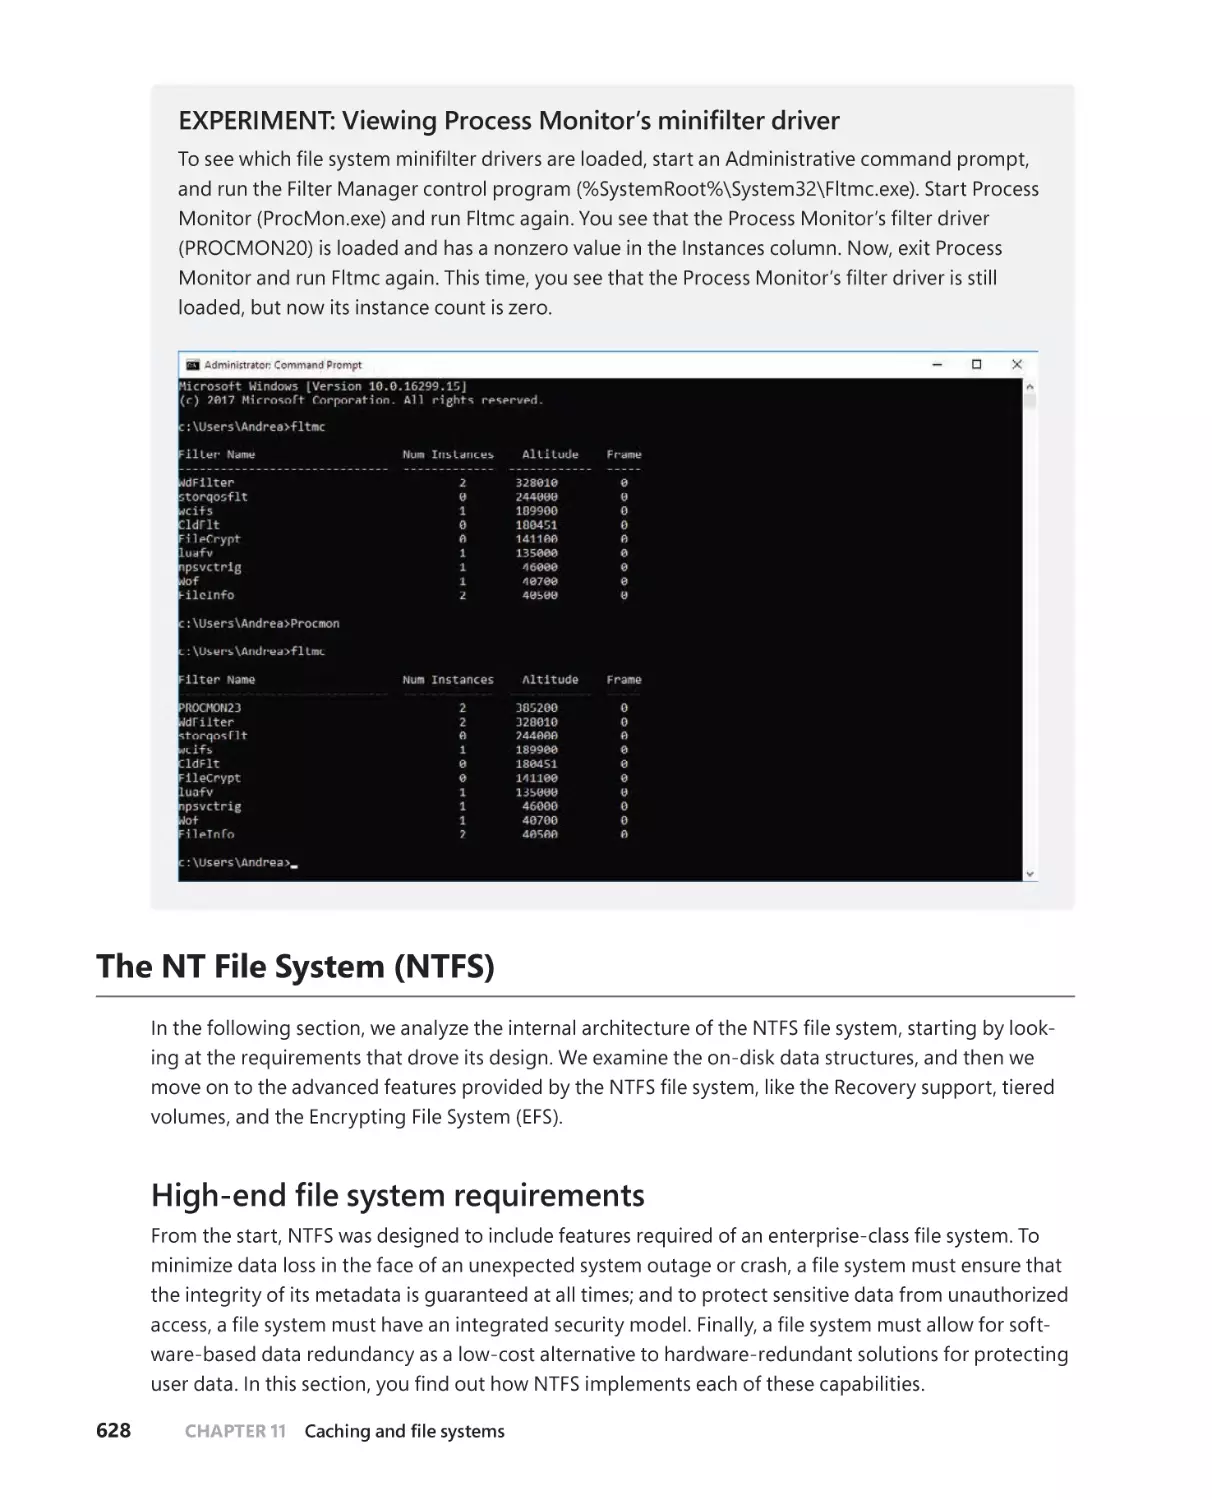 The NT File System (NTFS)
High-end file system requirements